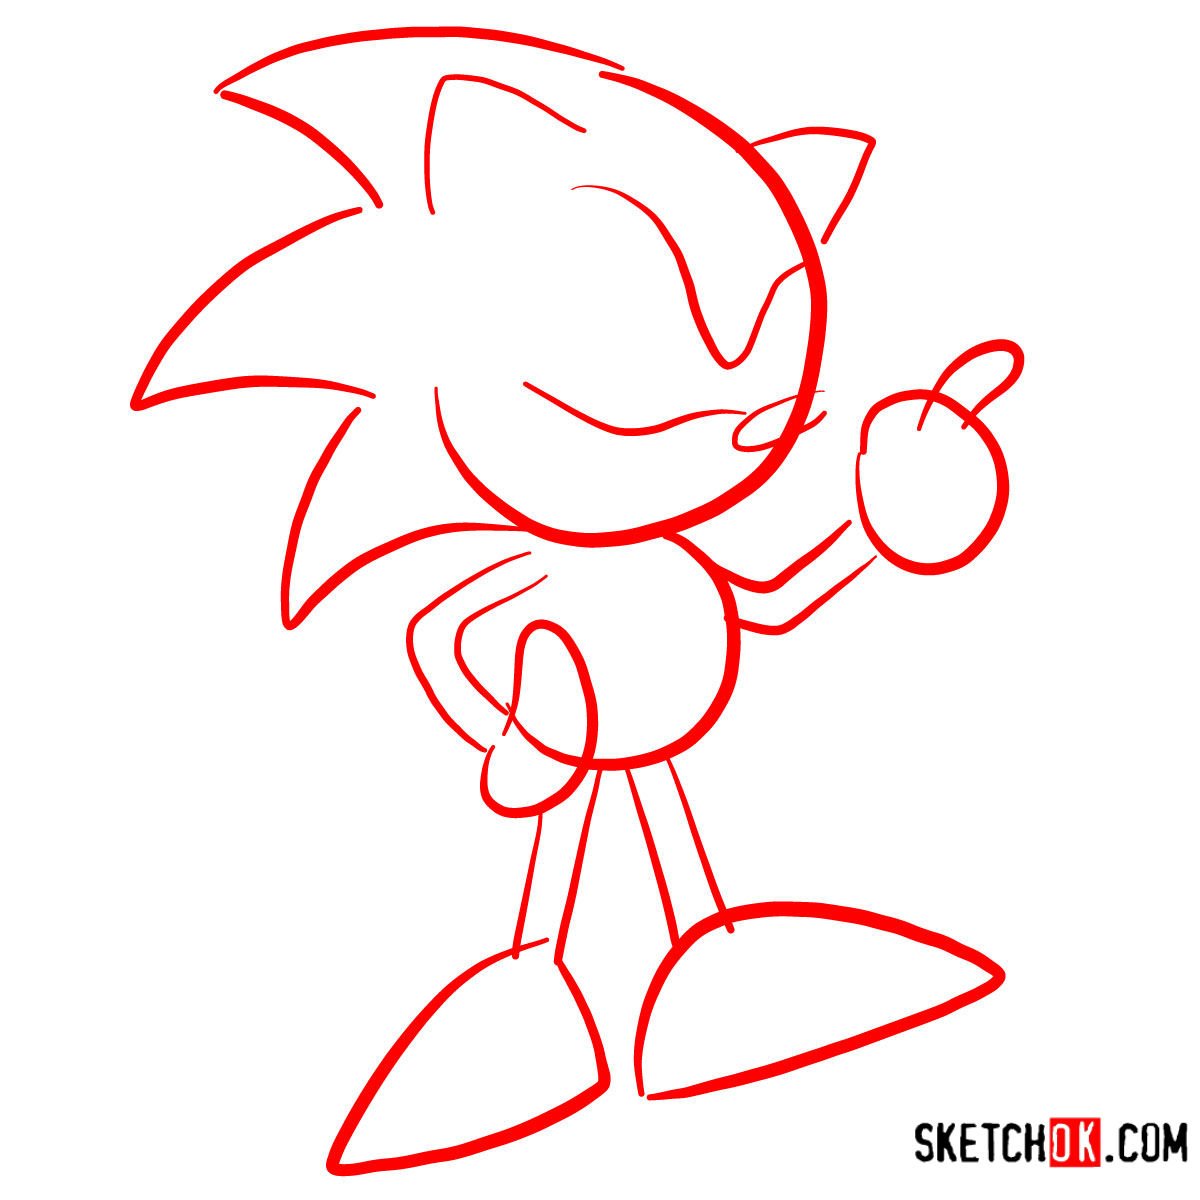 How to draw Sonic the Hedgehog SEGA games style - step 01